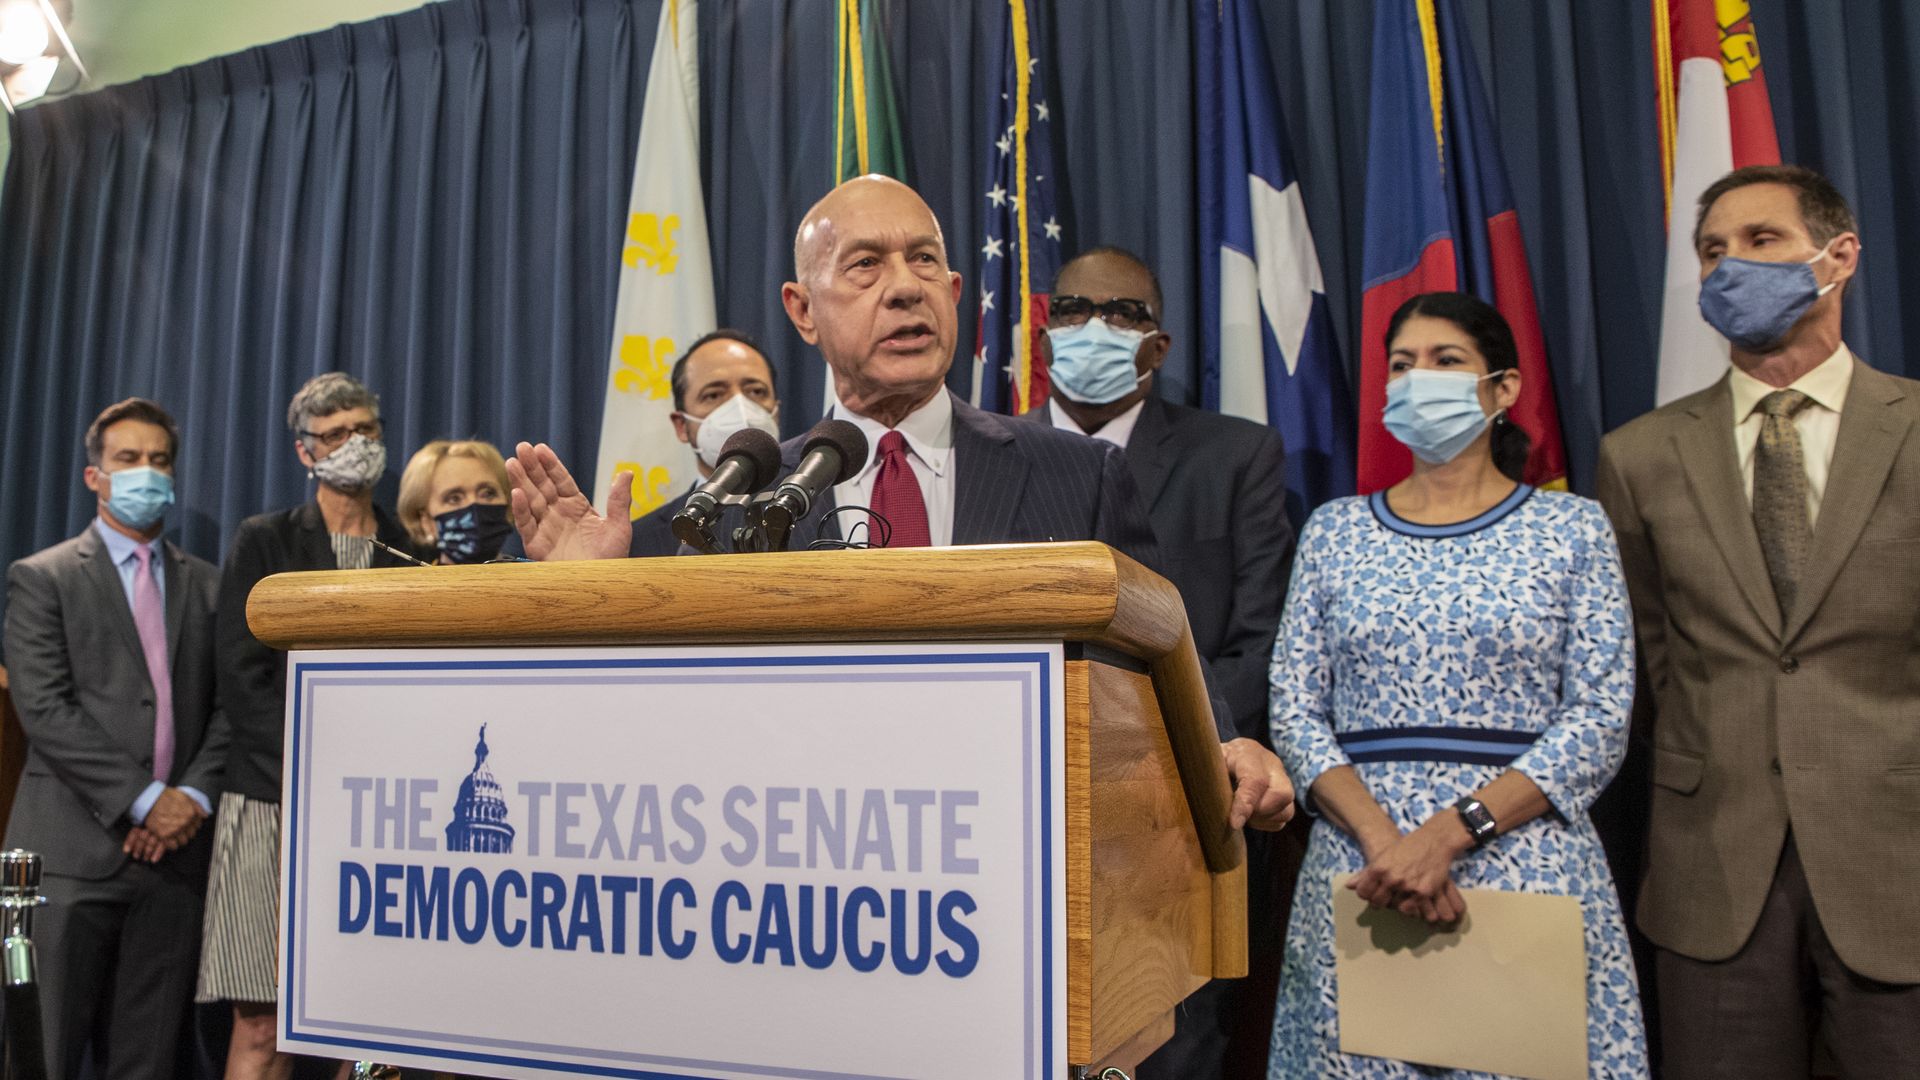 State Senator John Whitmire, a Democrat from Texas, speaks during a news conference at the Texas State Capitol in Austin, Texas, U.S., on Wednesday, July 21